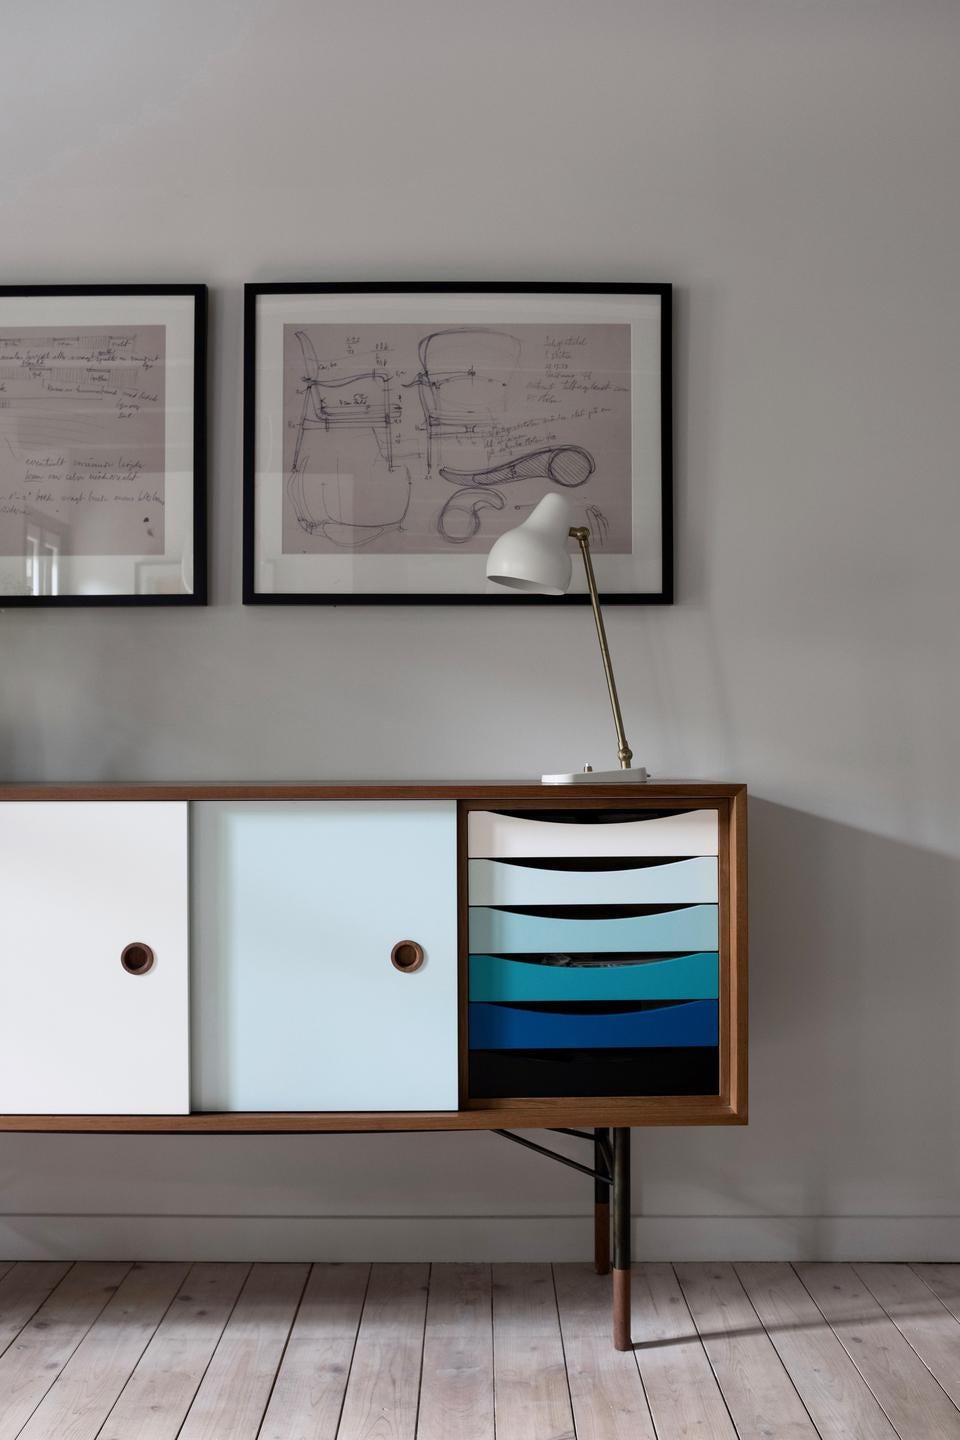 Finn Juhl Sideboard in Wood and Cold Colors Whit Unit Tray 5